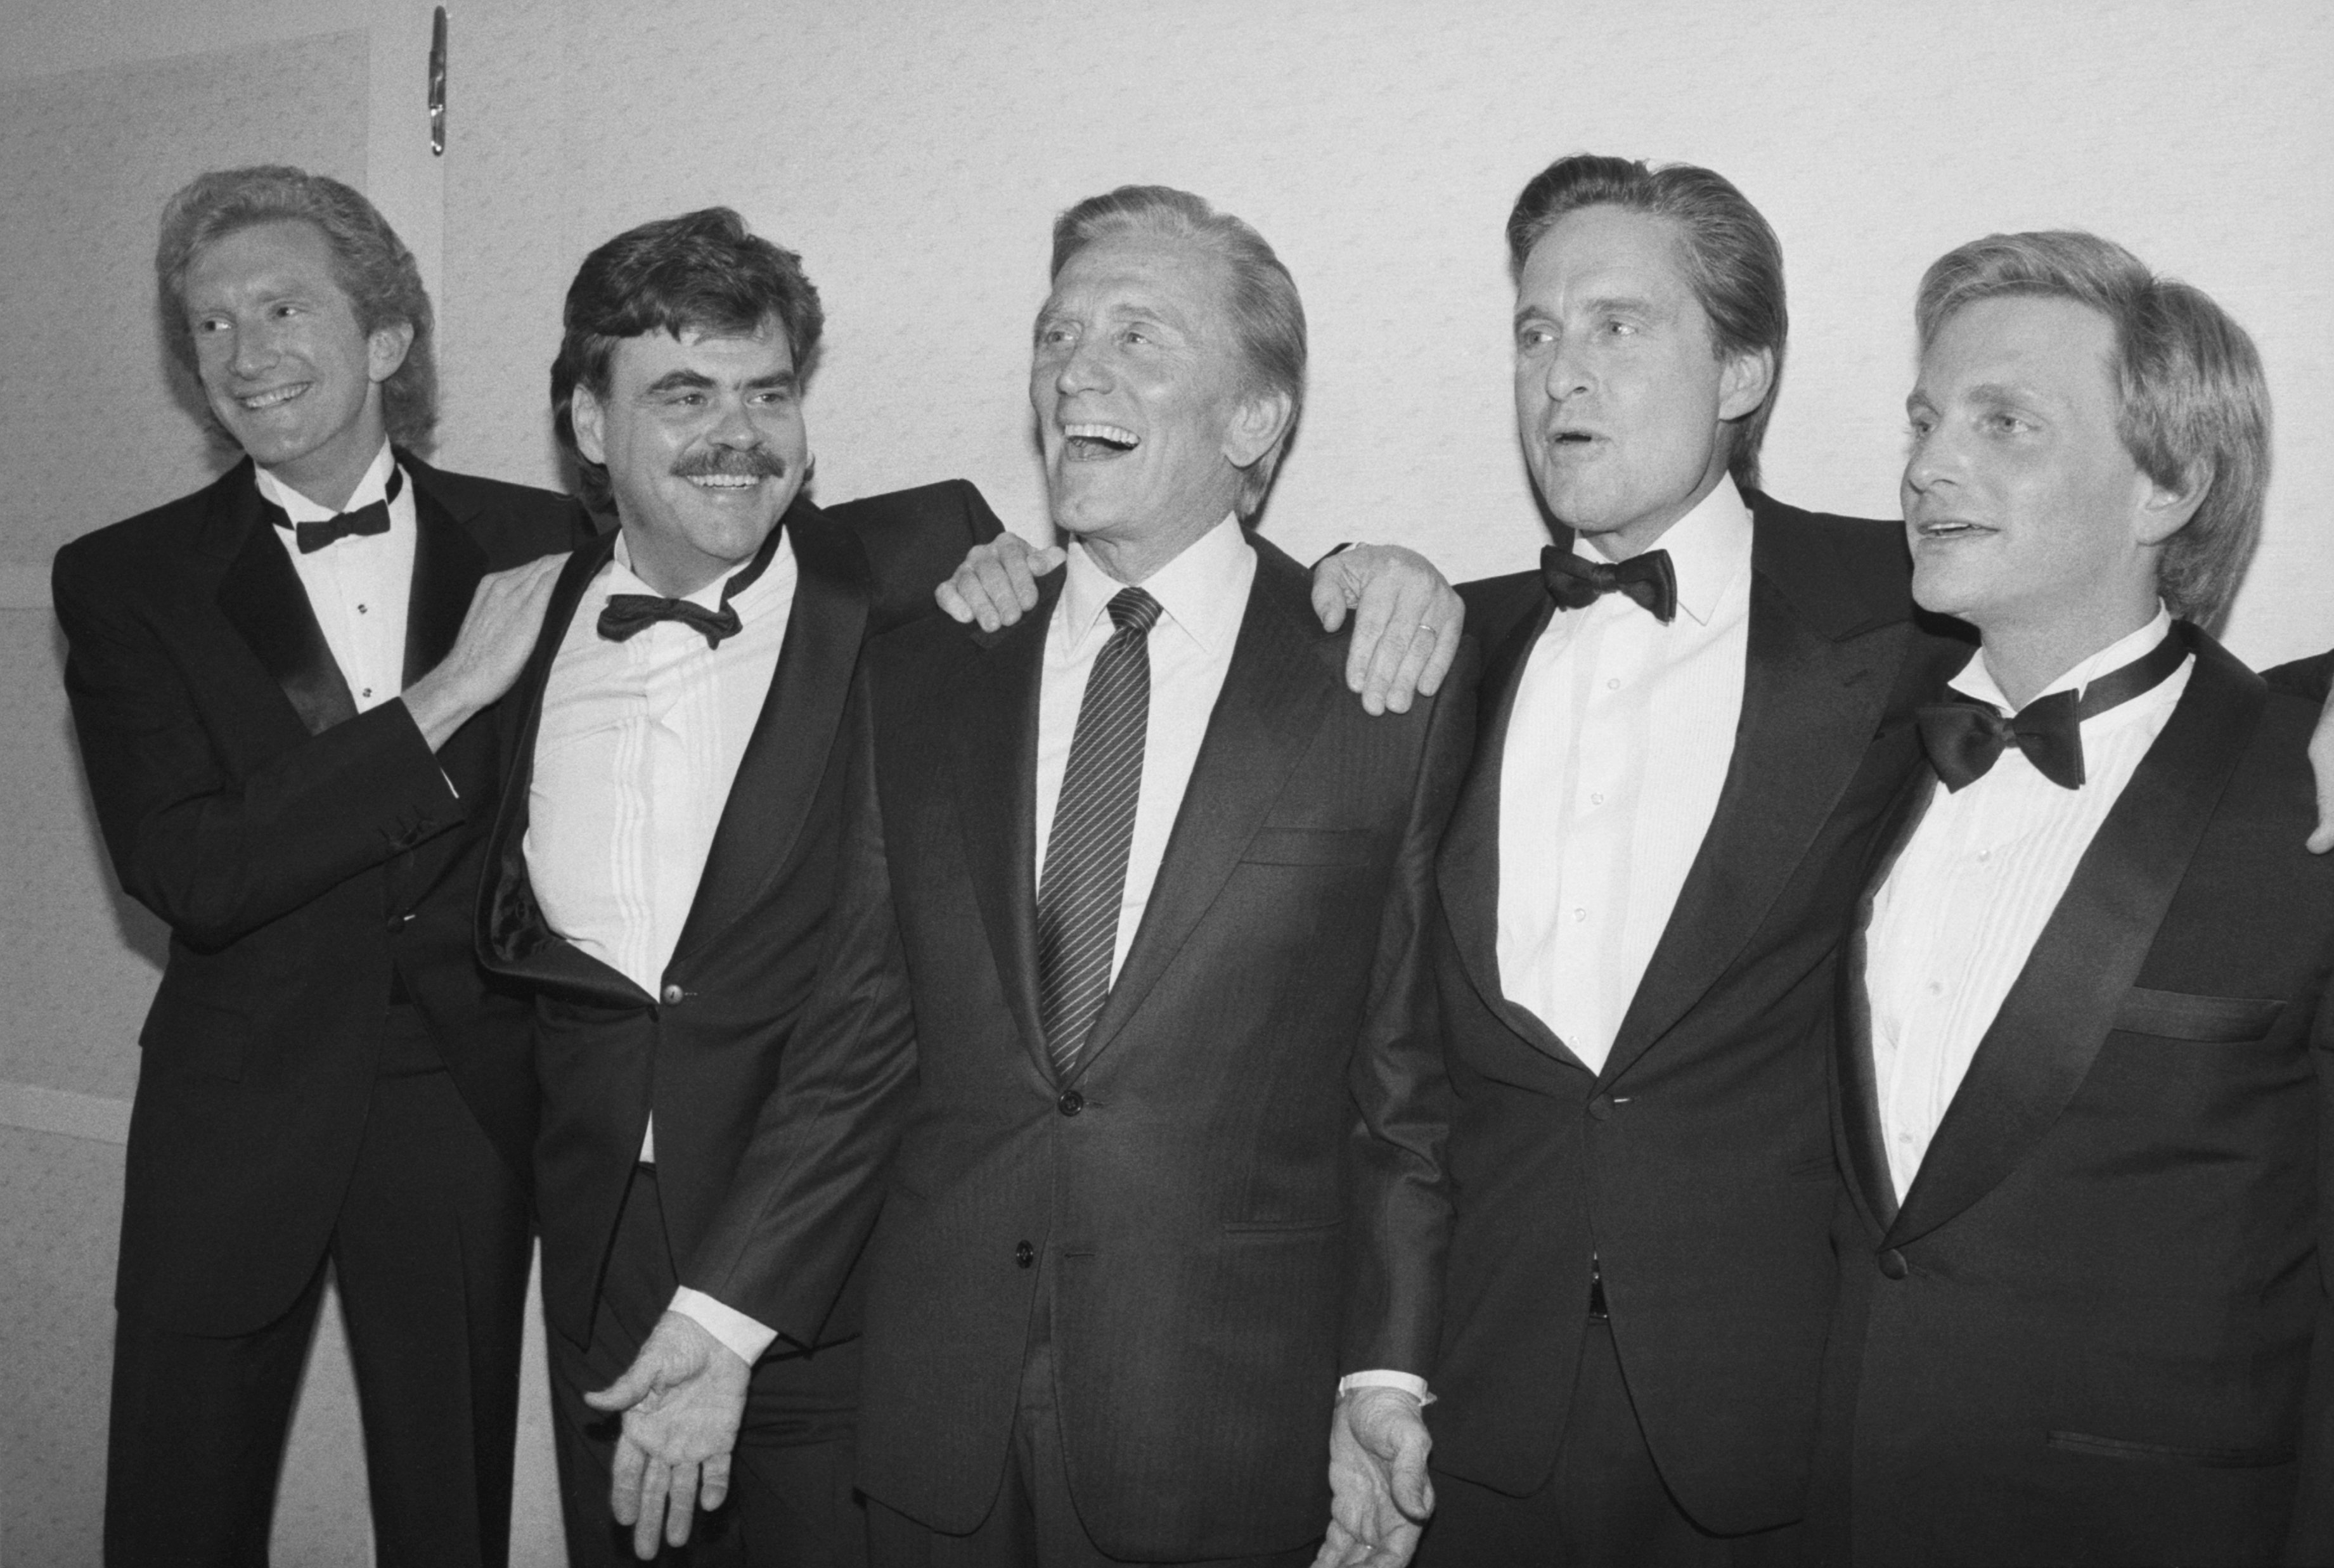 Kirk Douglas posing with his four sons during a gala evening at the Majestic Theatre in Manhattan from left to right Peter, Joel, Michael and Eric. | Source: Getty Images